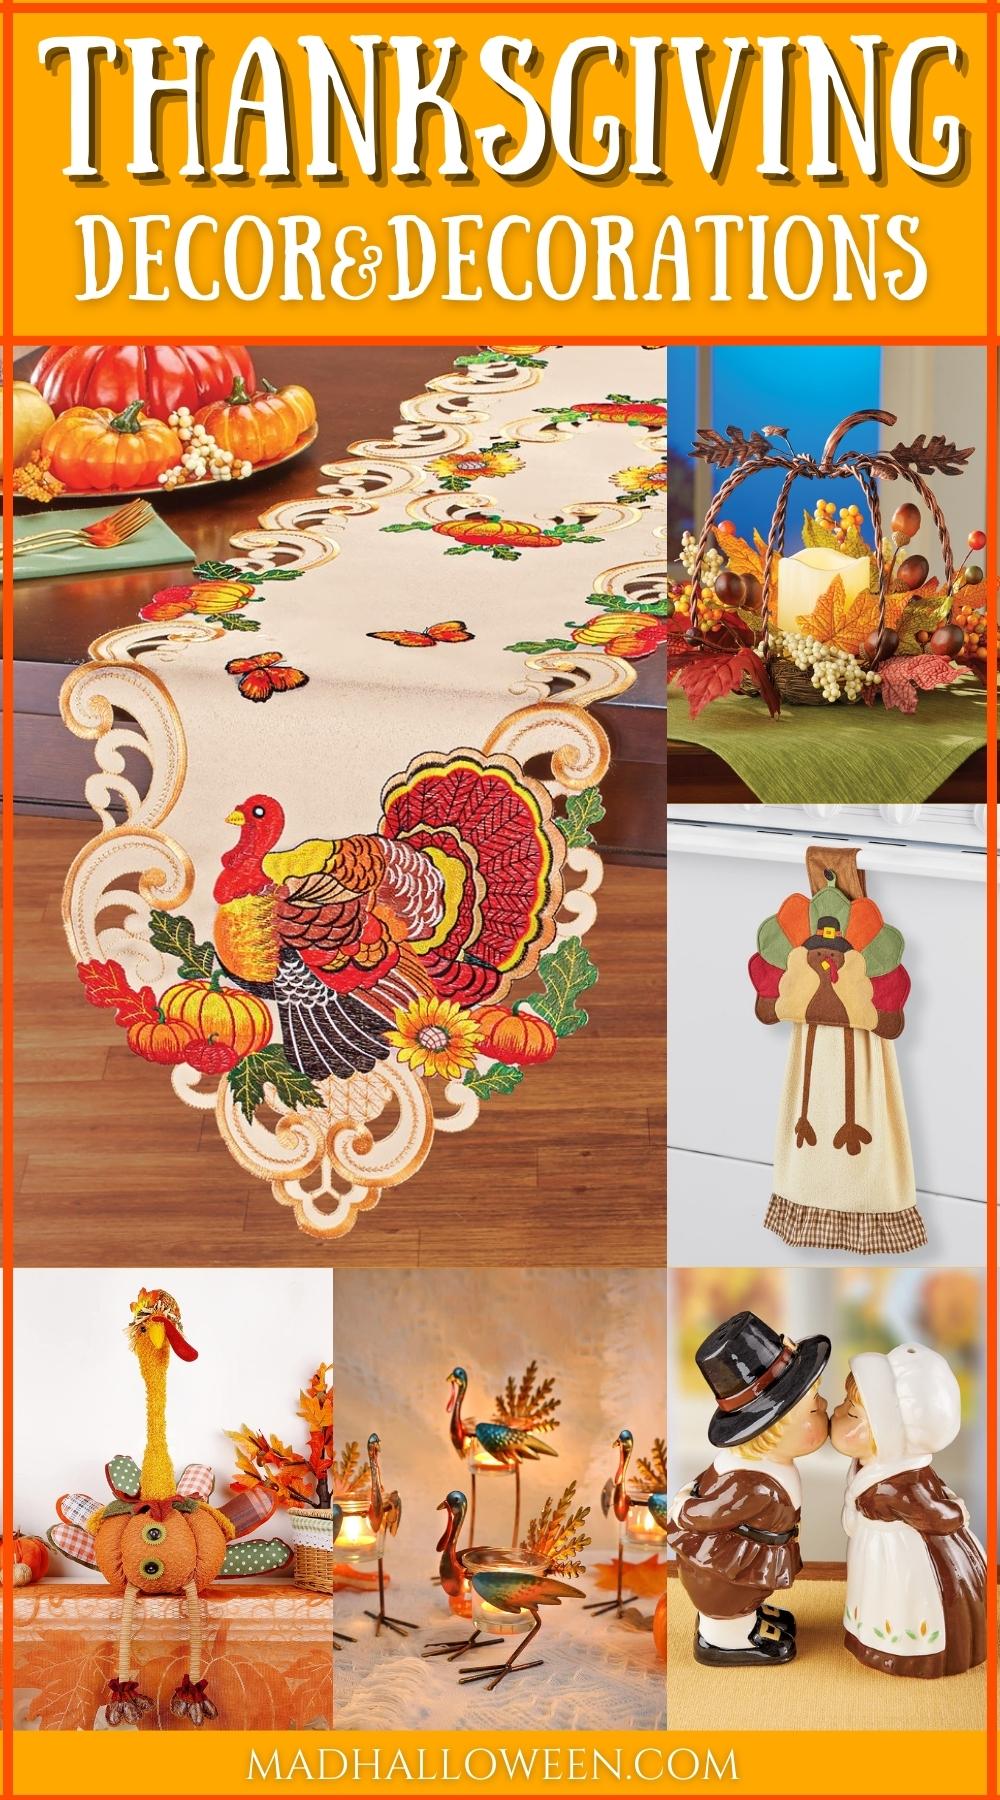 Thanksgiving Decor and Decorations - Mad Halloween